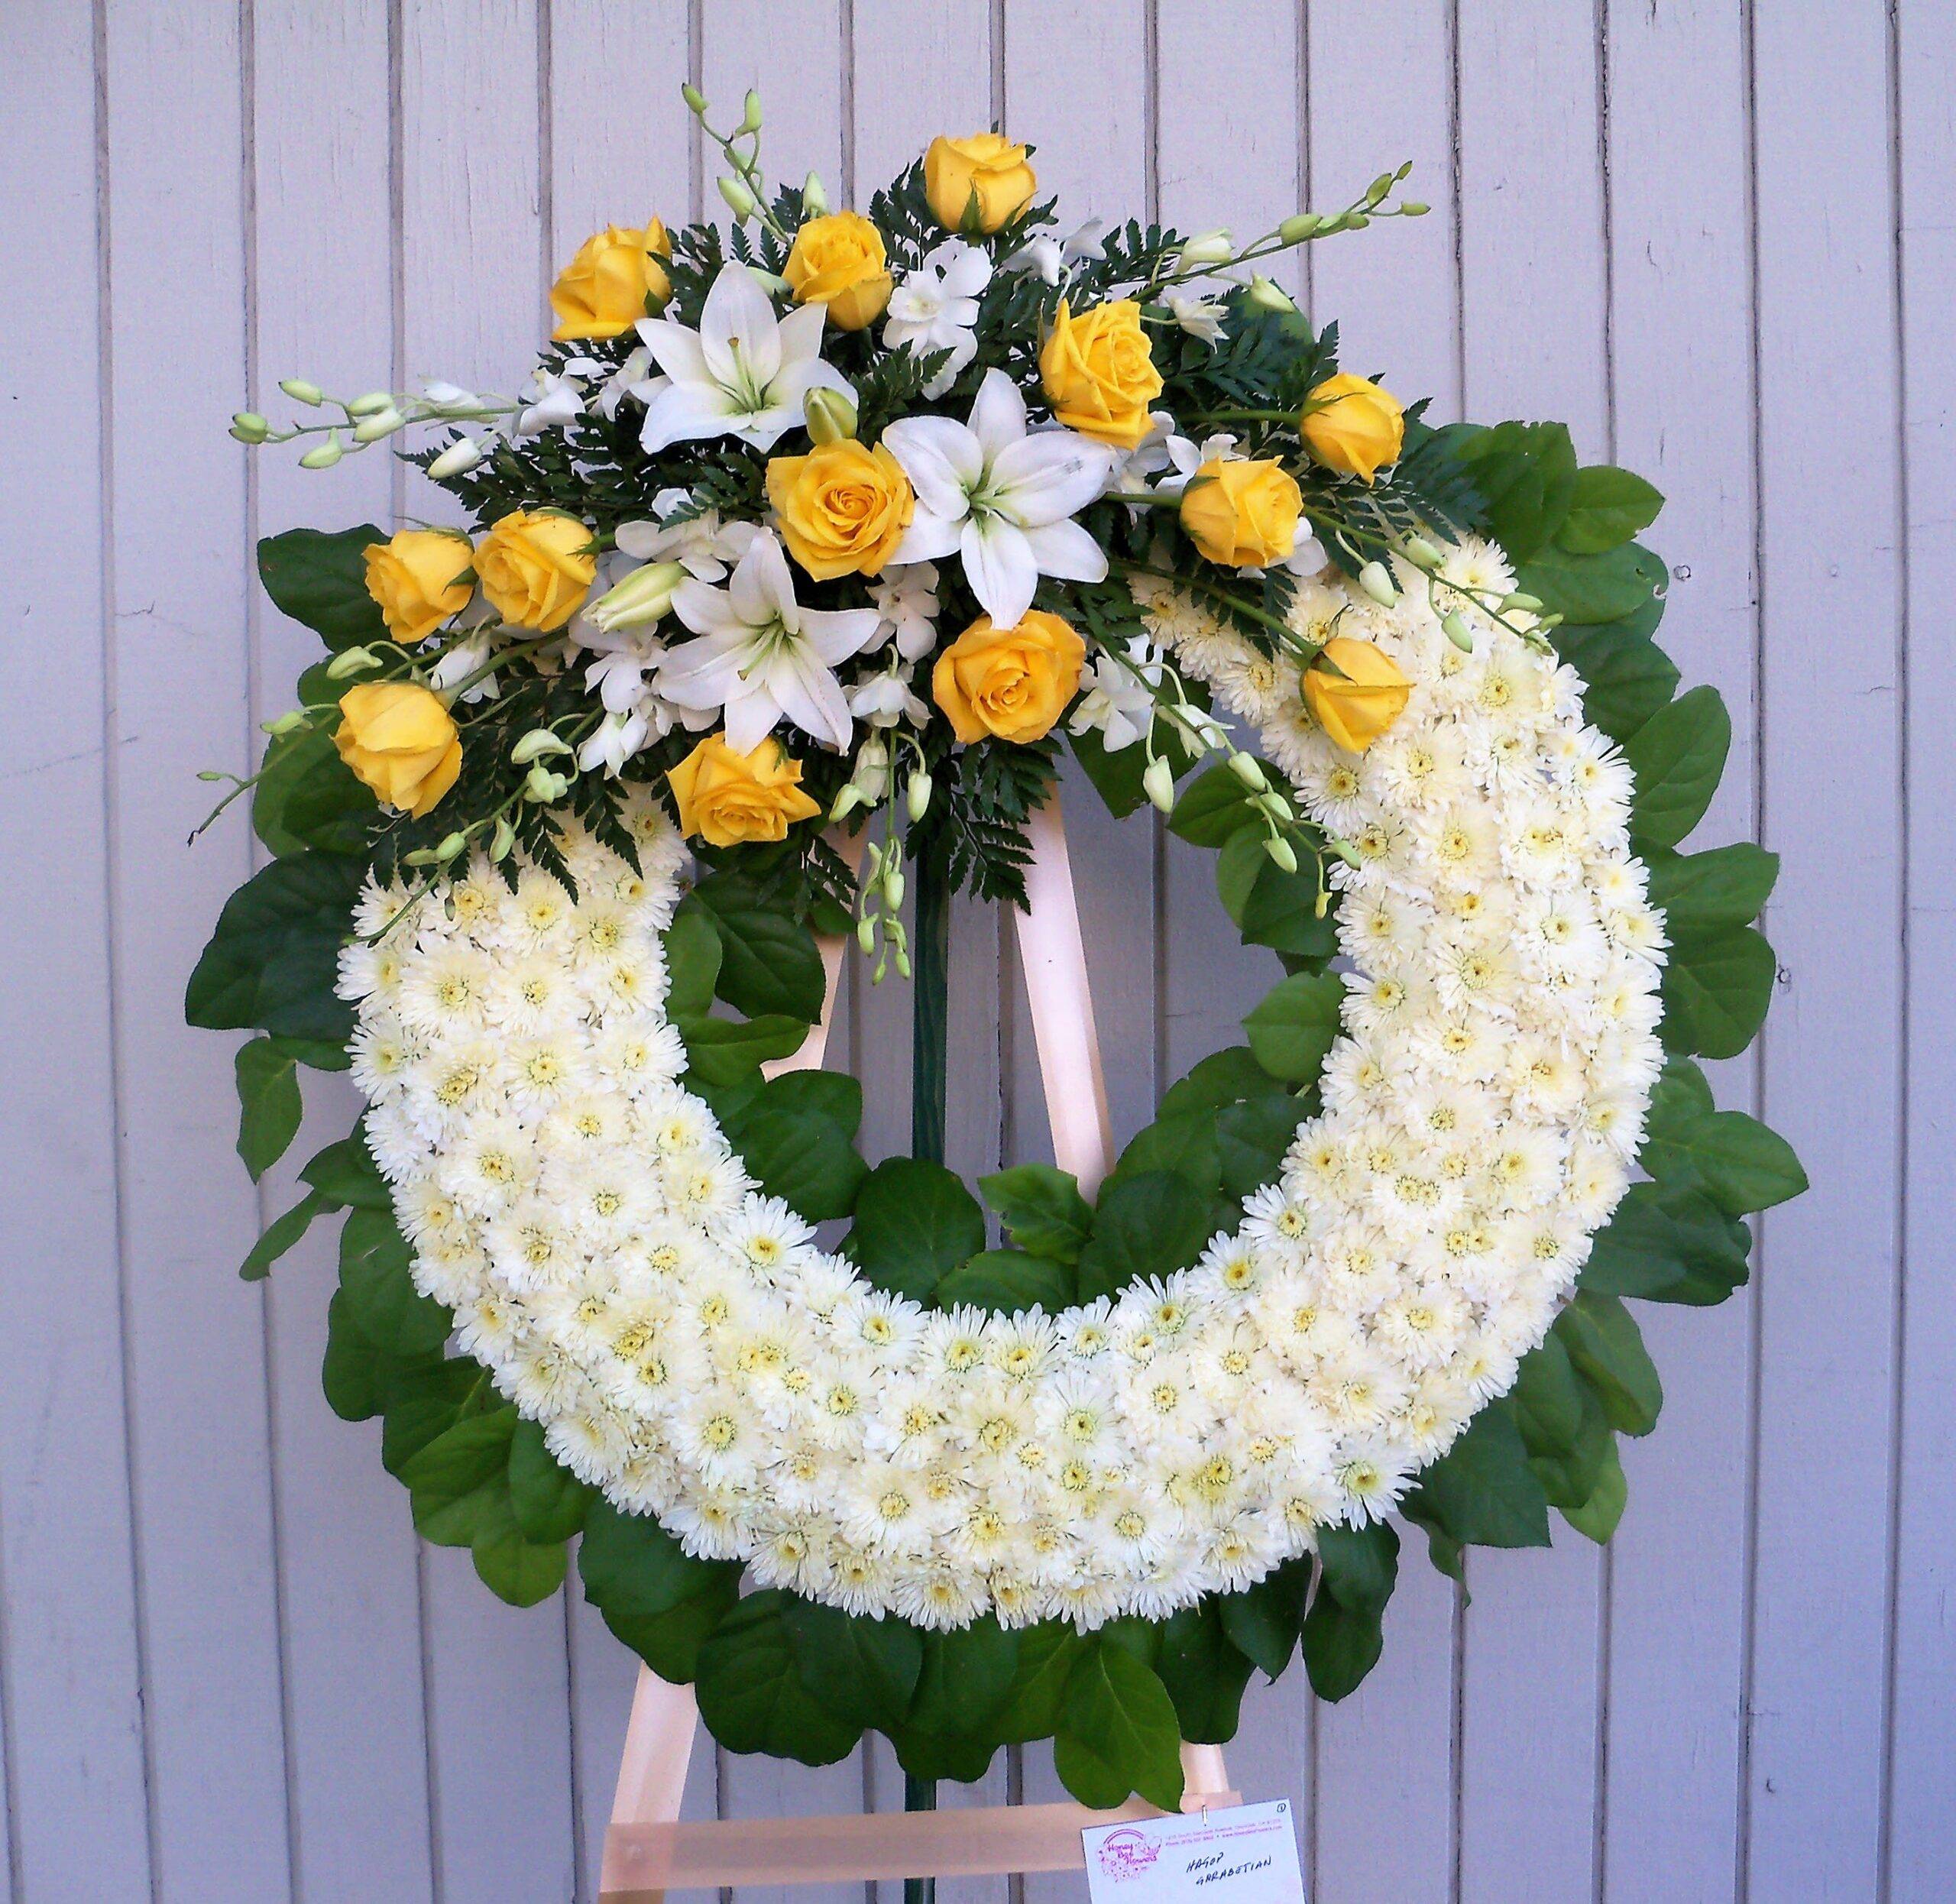 Friendship Wreath $150 + $7 Delivery